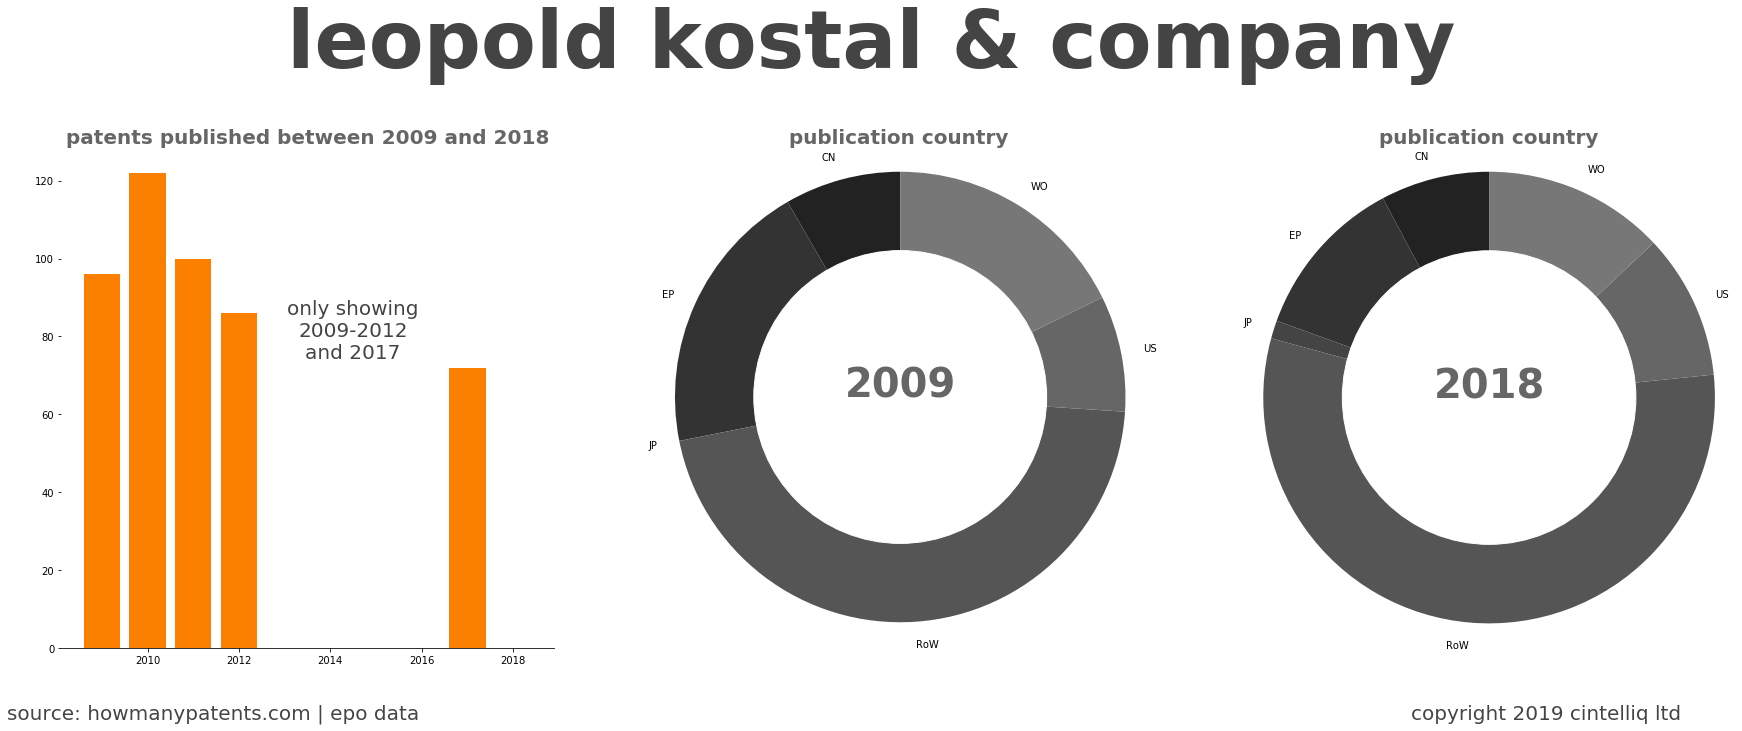 summary of patents for Leopold Kostal & Company